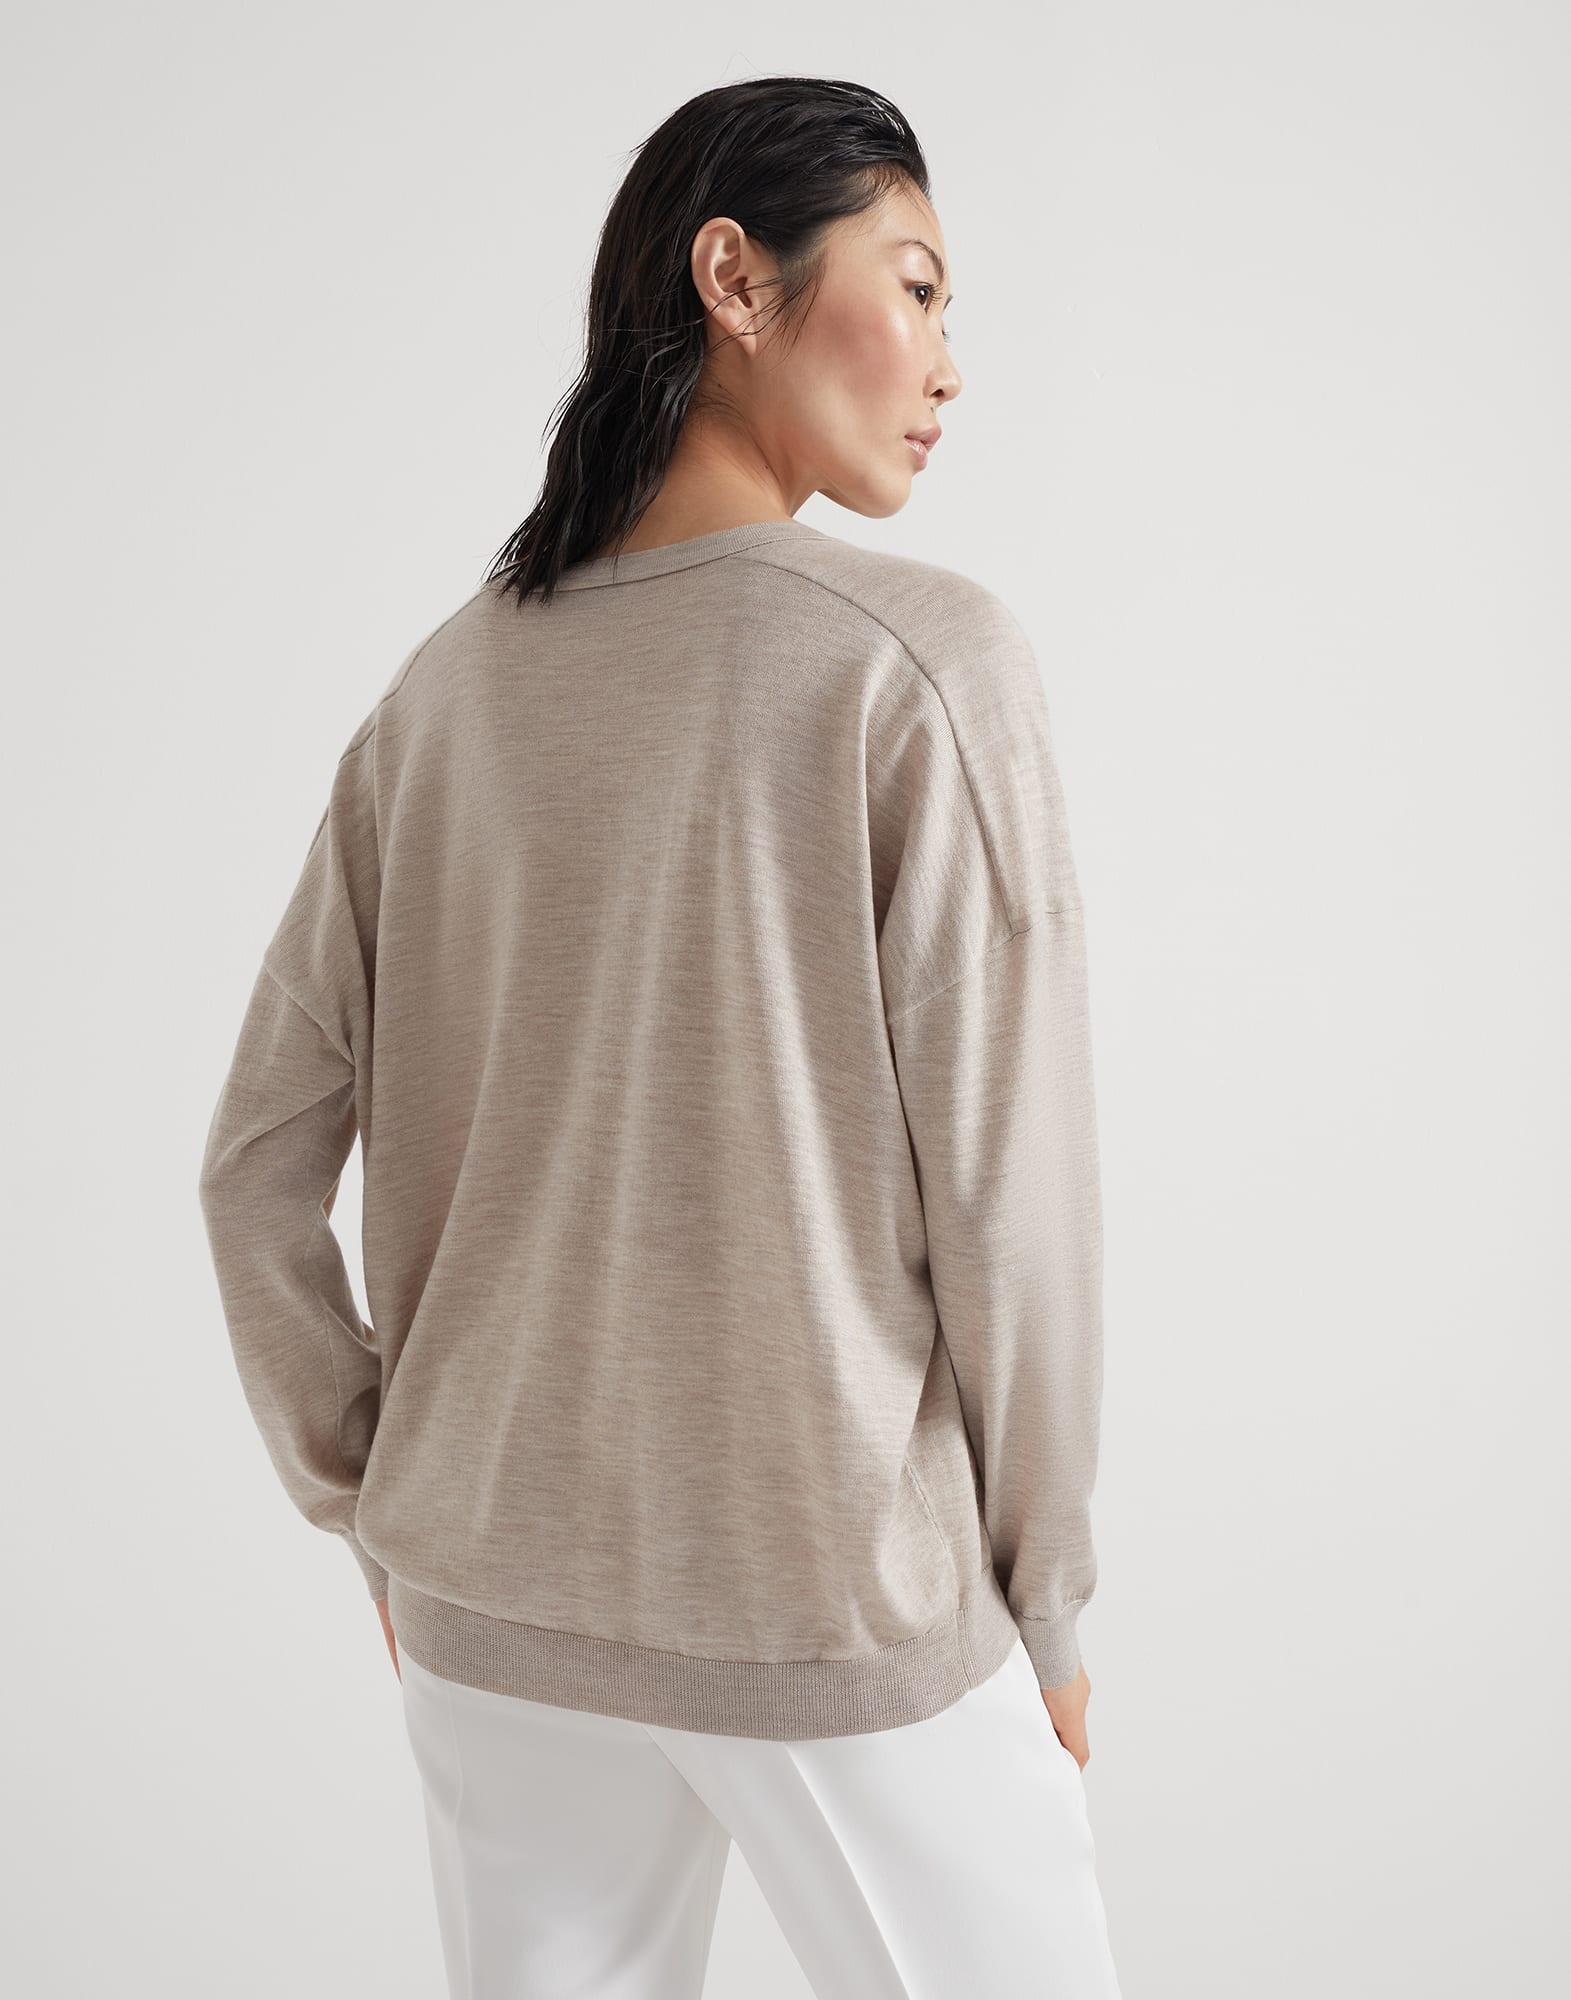 Cashmere and silk lightweight sweater with shiny collar trim - 2